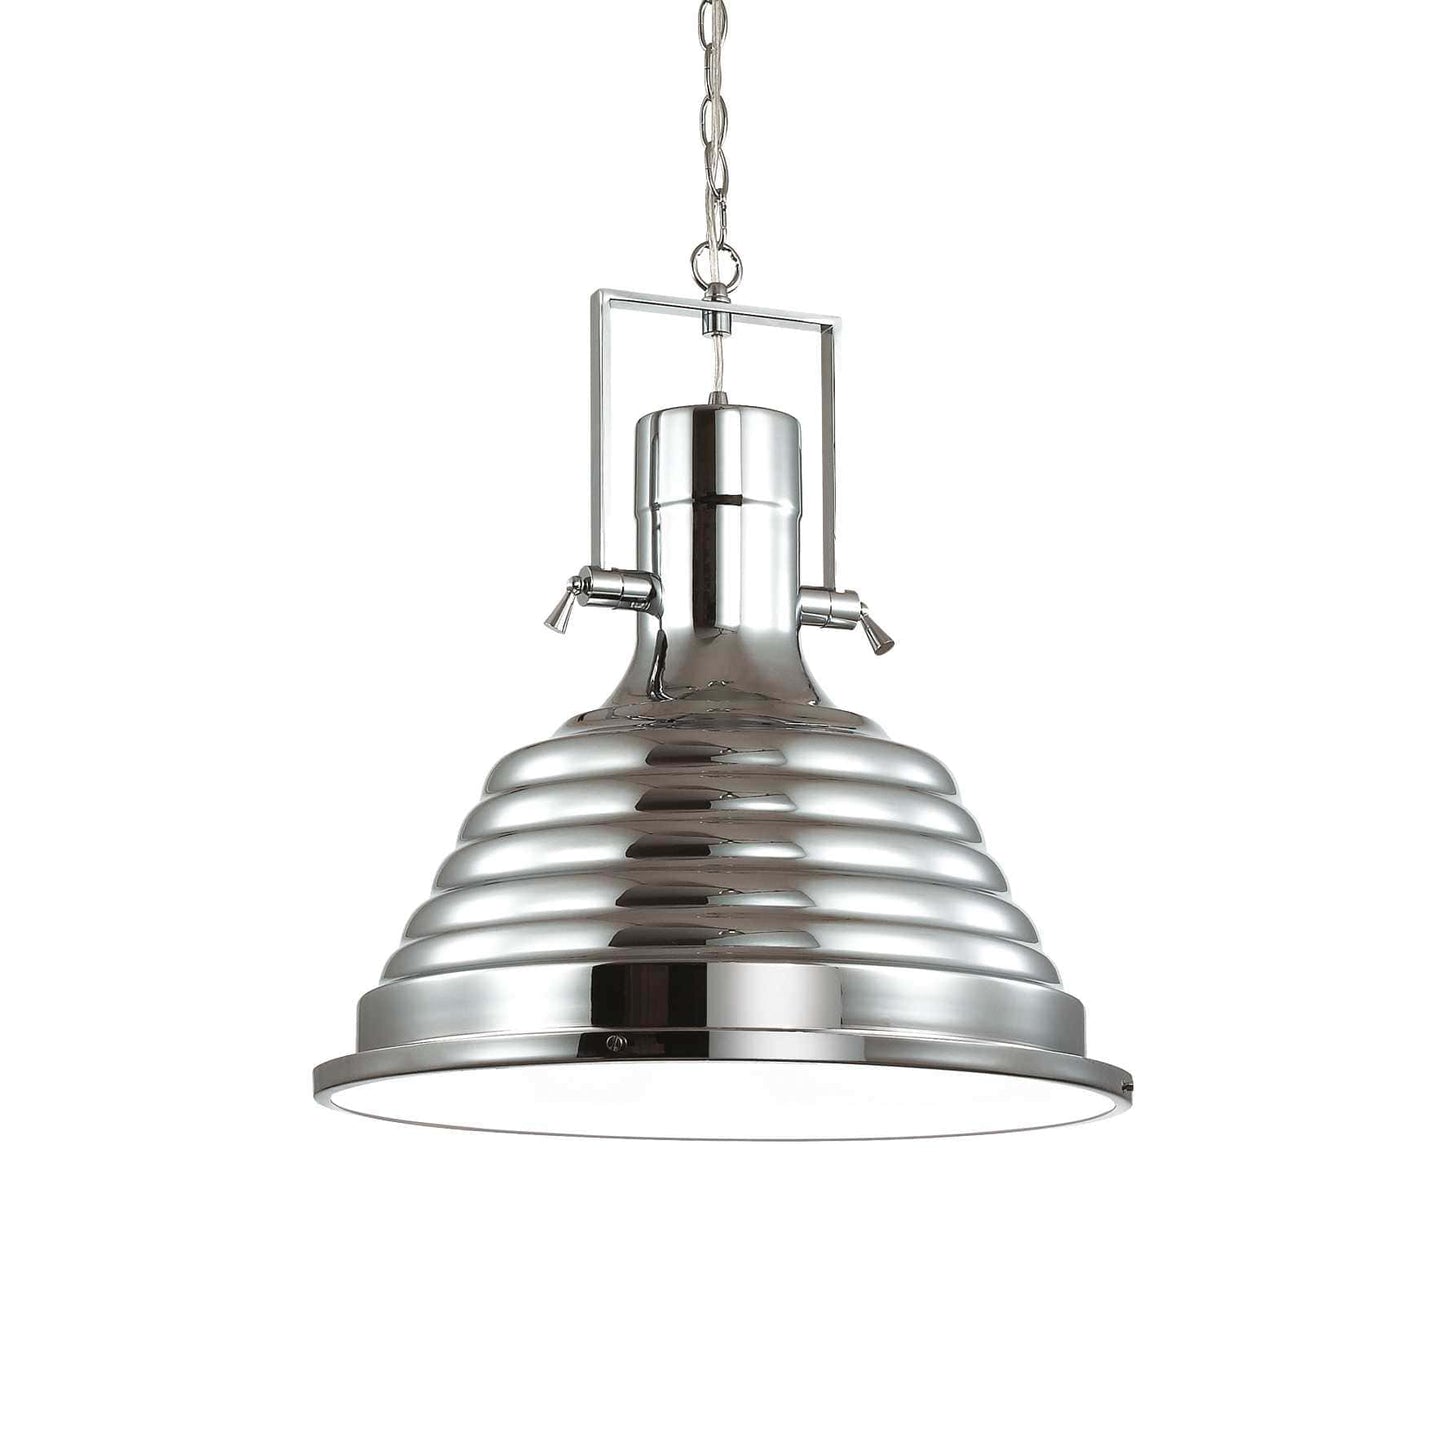 Ideal Lux Fisherman Ceiling Pendant